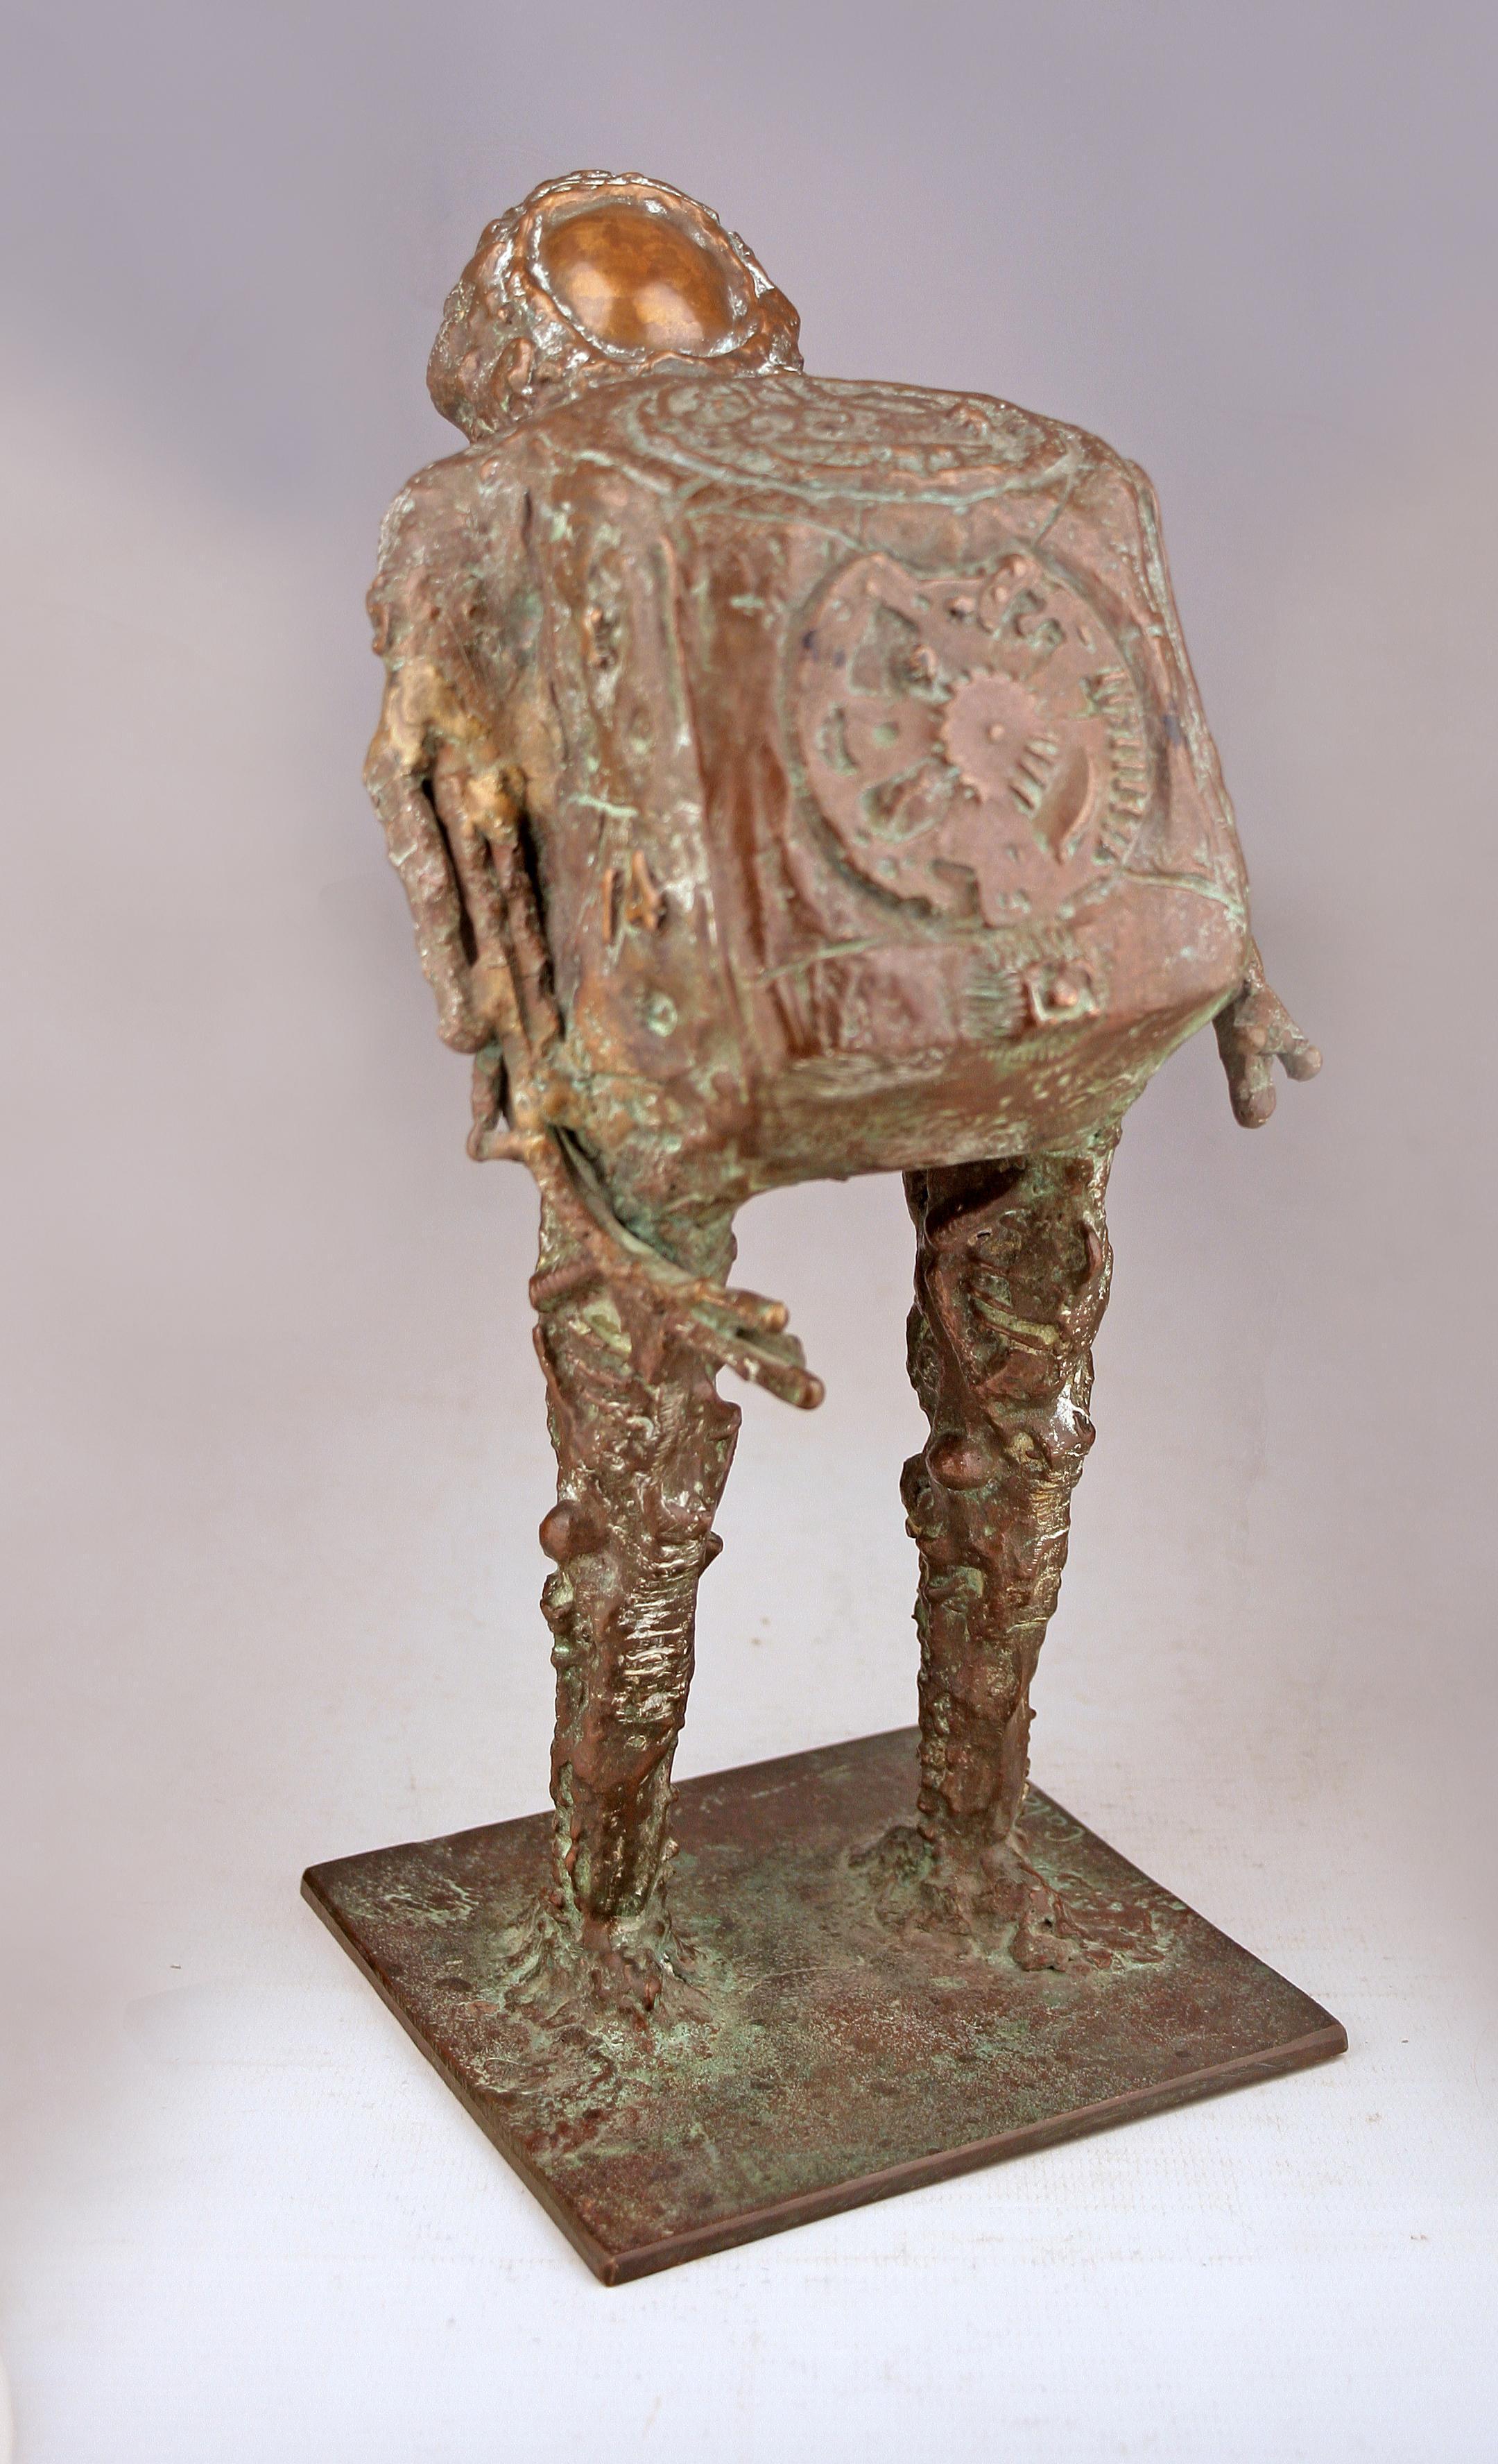 Mid-20th century astronaut bronze sculpture by italian-brazilian artist Doménico Calabrone

By: Doménico Calabrone
Material: bronze, copper, metal
Technique: cast, hammered, hand-crafted, polished, molded, metalwork
Dimensions: 5 in x 5 in x 12.5